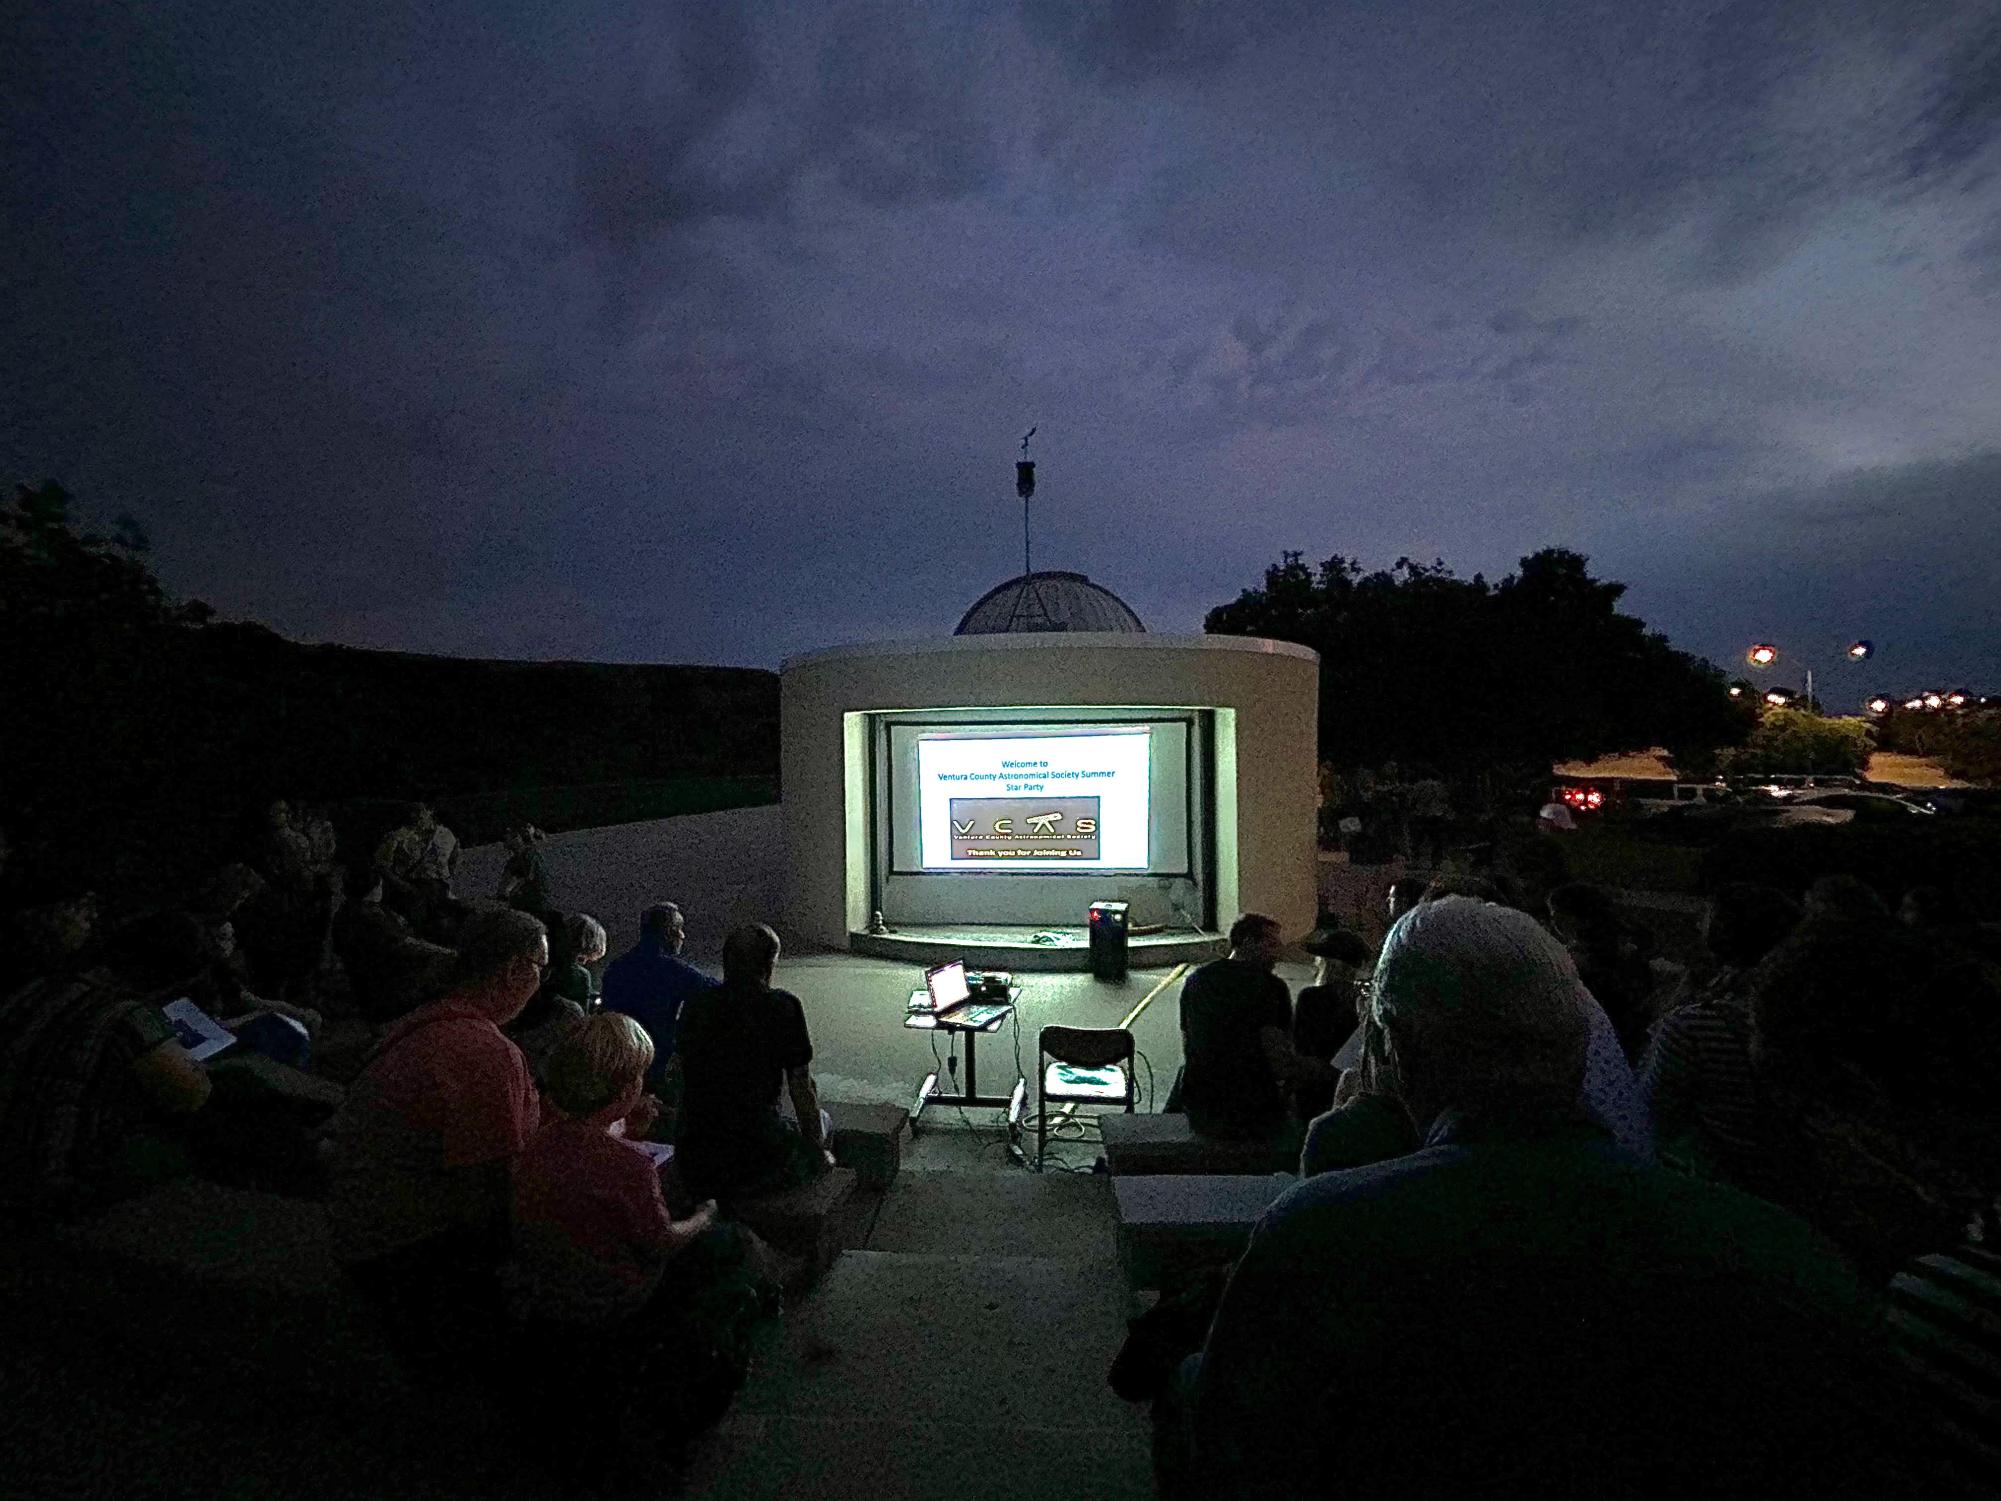 The "Star Party" presentation at Moorpark College continues on Sep. 9, 2023 even with cloud swaths covering the stars.